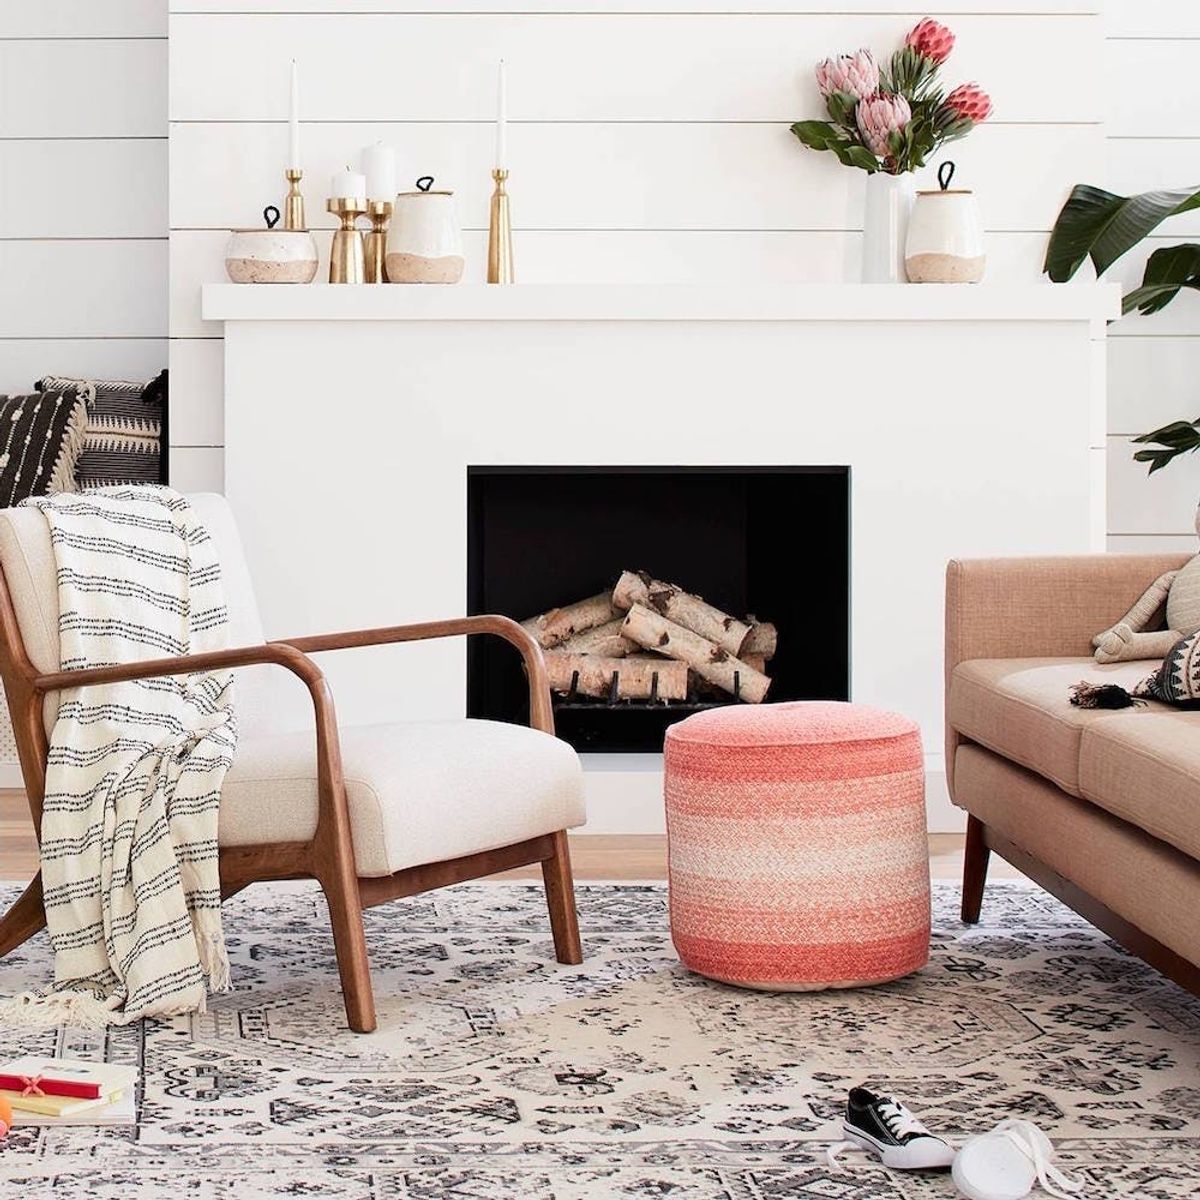 Target’s Modern Living Room Collection Is Full of Family-Friendly Picks